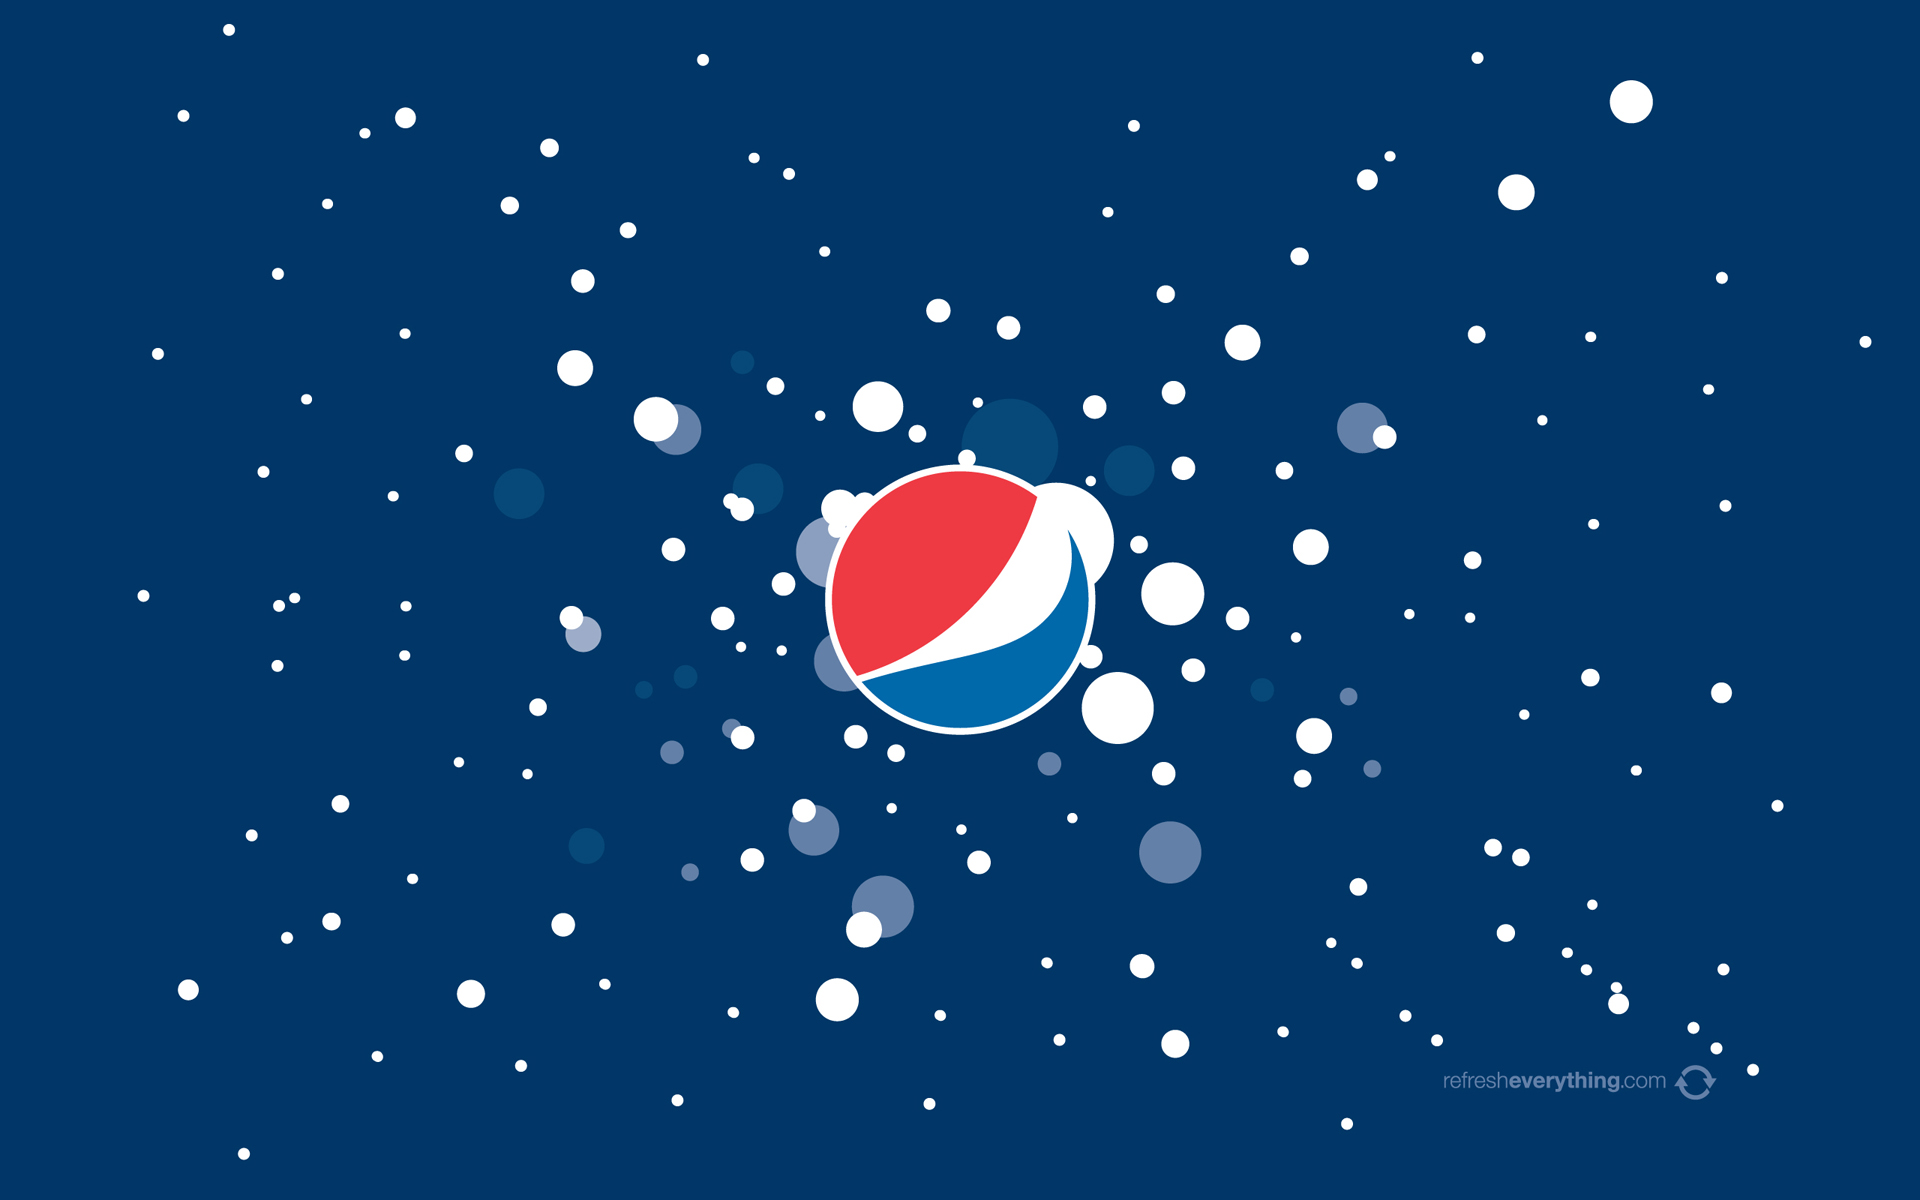 Products Pepsi HD Wallpaper | Background Image